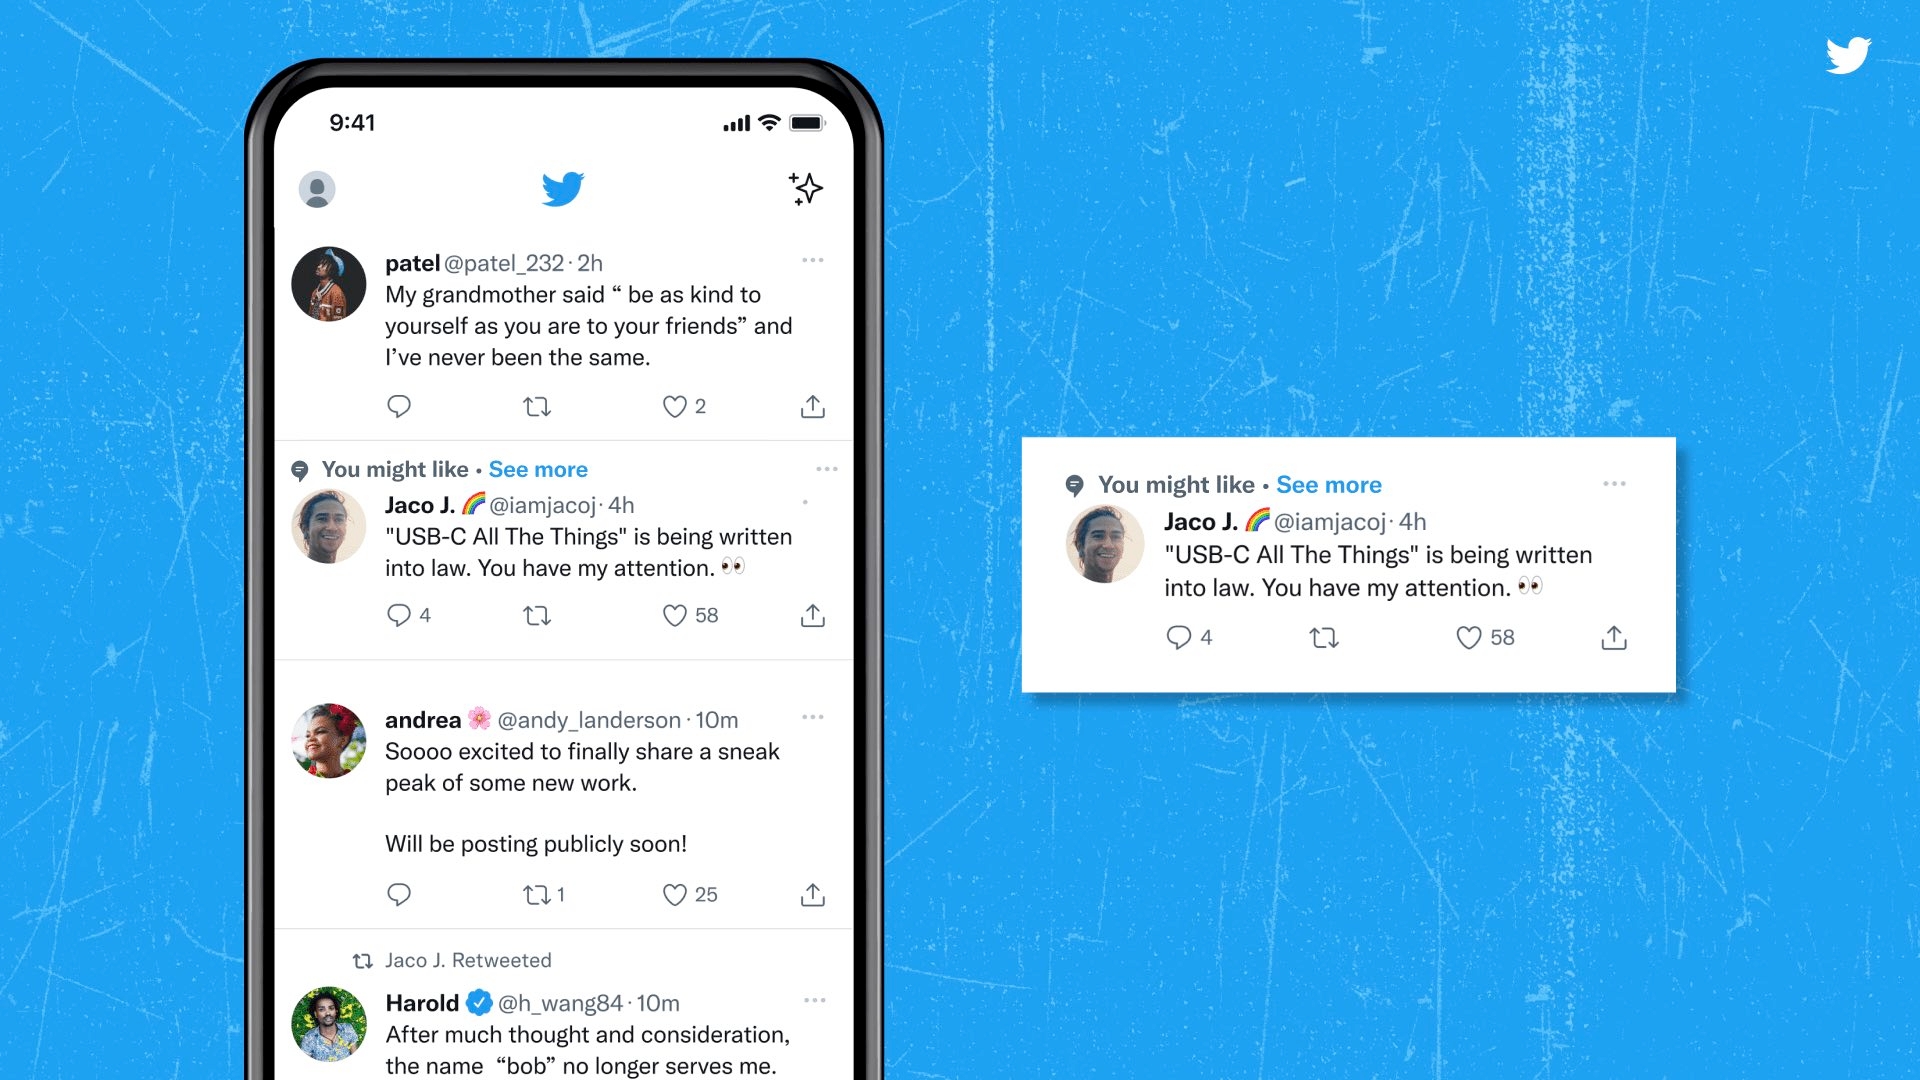 Twitter’s algorithm will use “signals” like interests, engagement, and users’ network to show suggested tweets “in your Home timeline, certain places in the Explore tab, and elsewhere.”